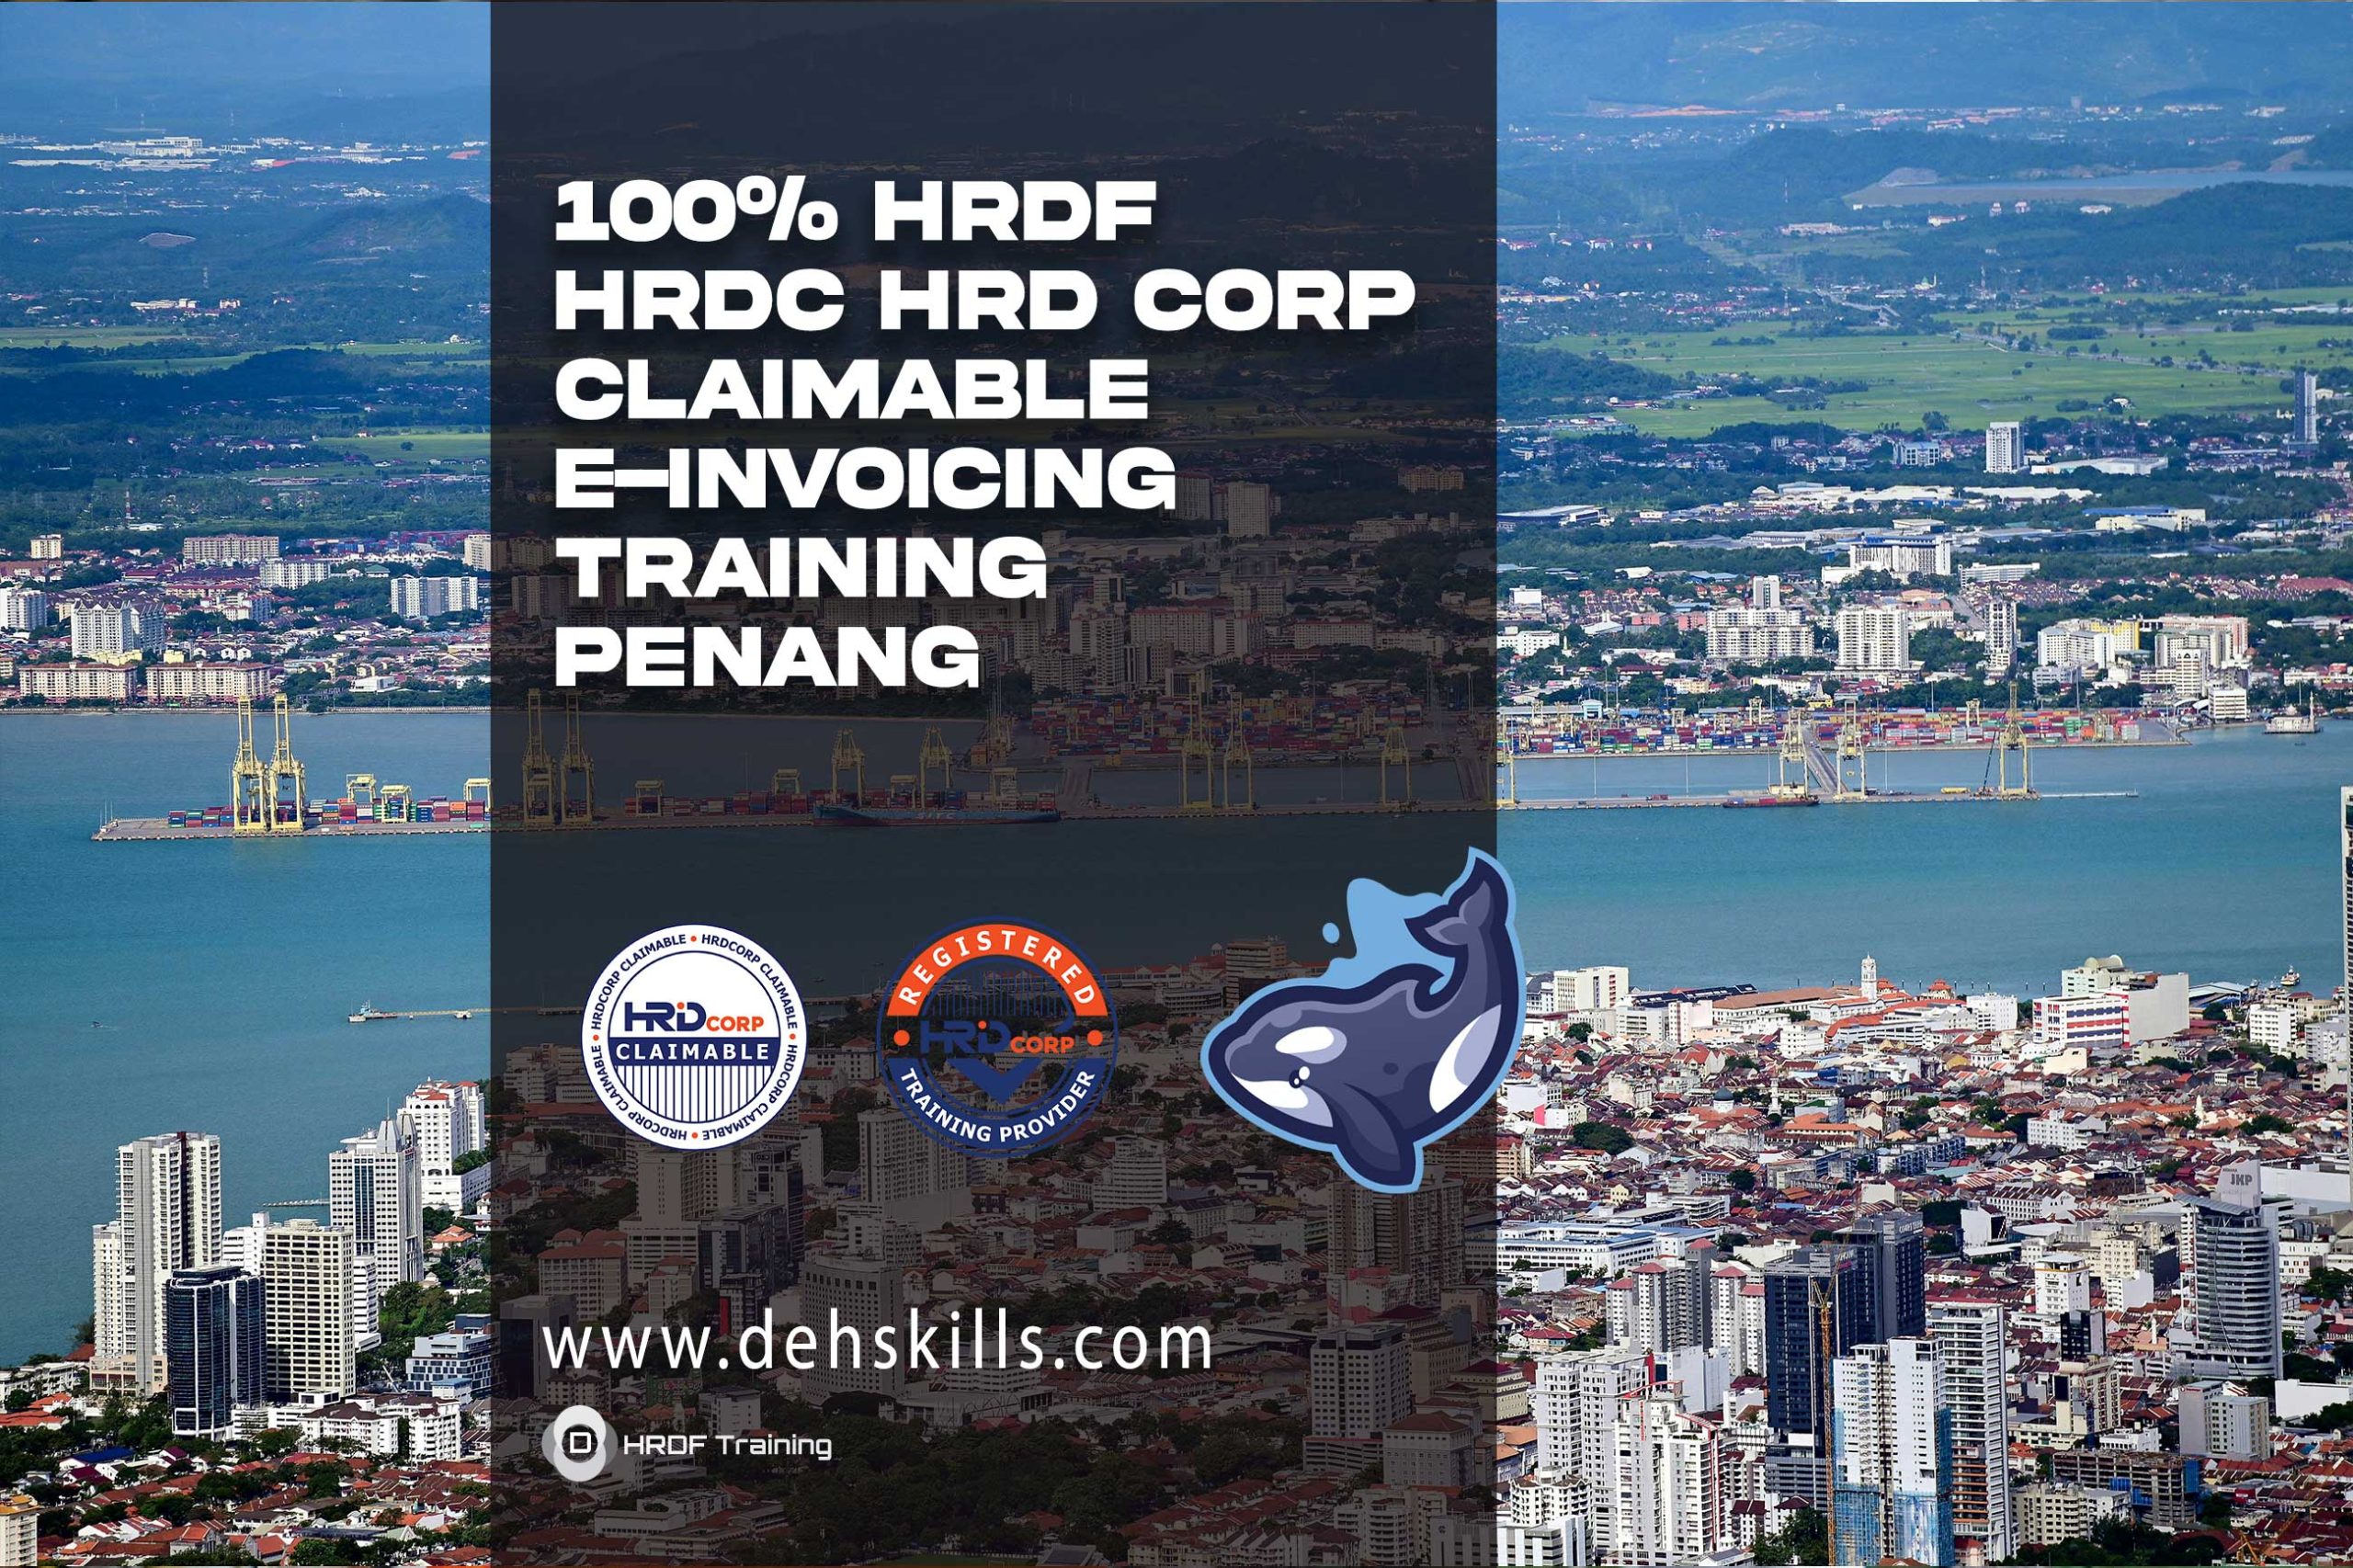 HRDF-HRDC-HRD-Corp-Claimable-e-Invoicing-Training-Penang